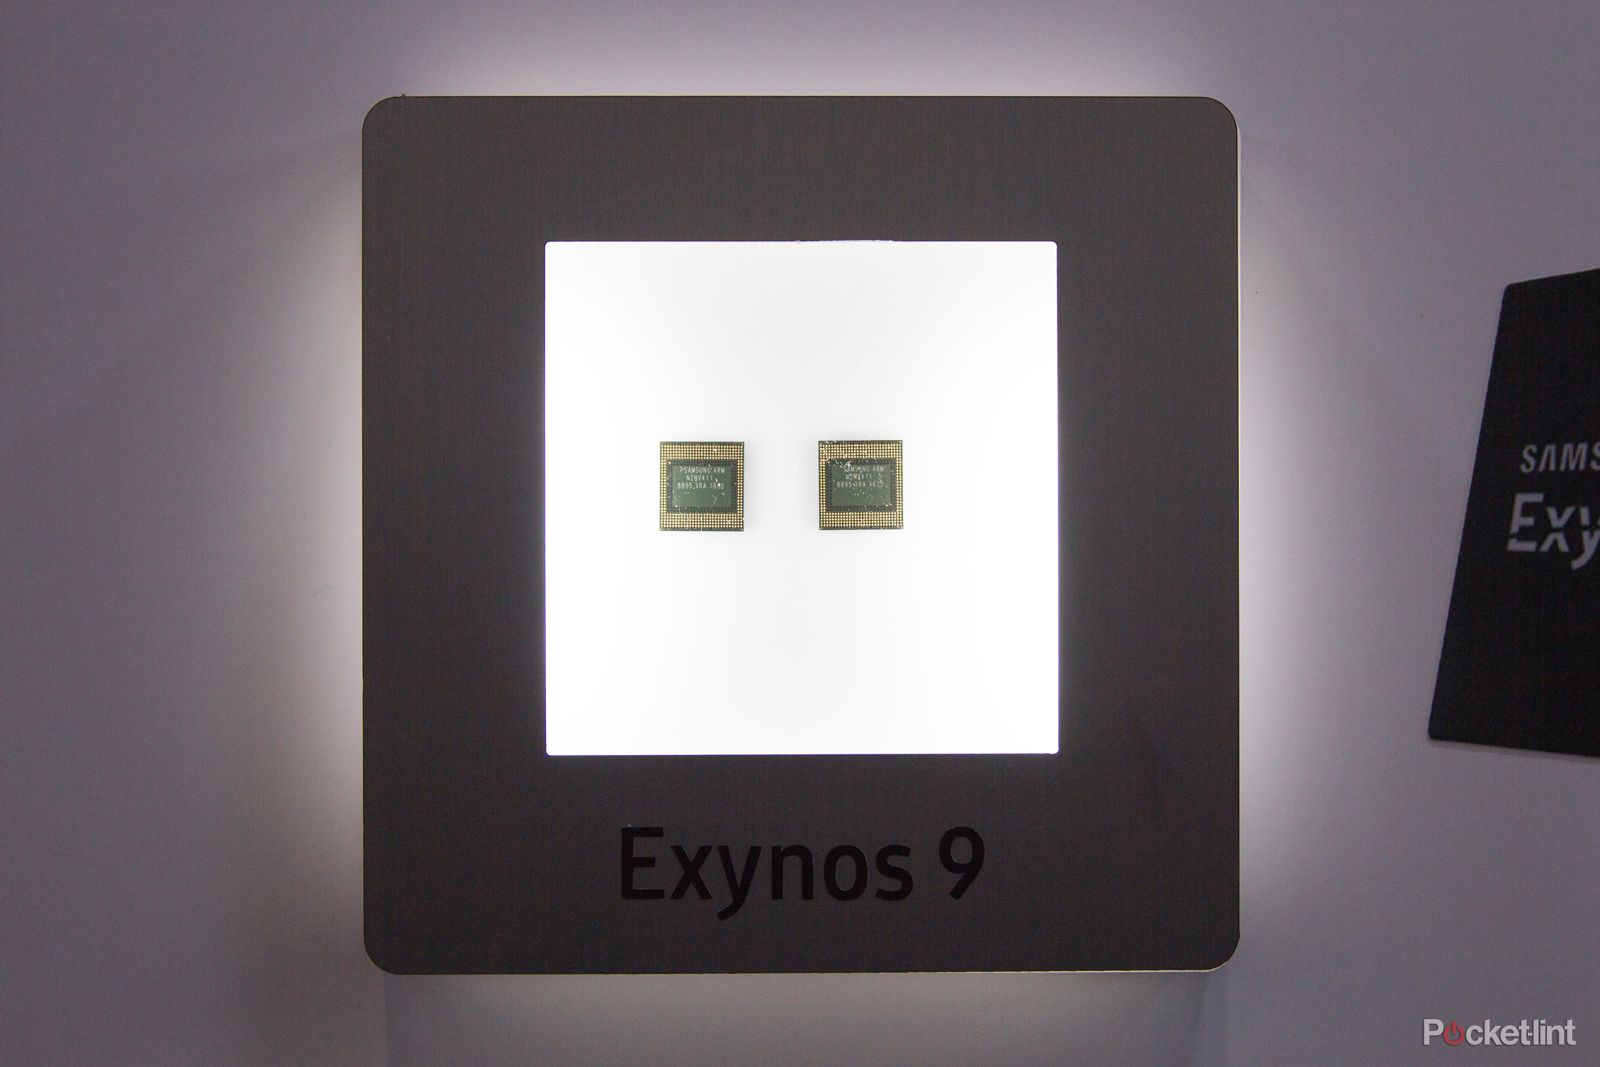 samsung exynos has ambitions beyond the galaxy s8 it s eyeing vr cars iot with a full range of chipset levels image 1